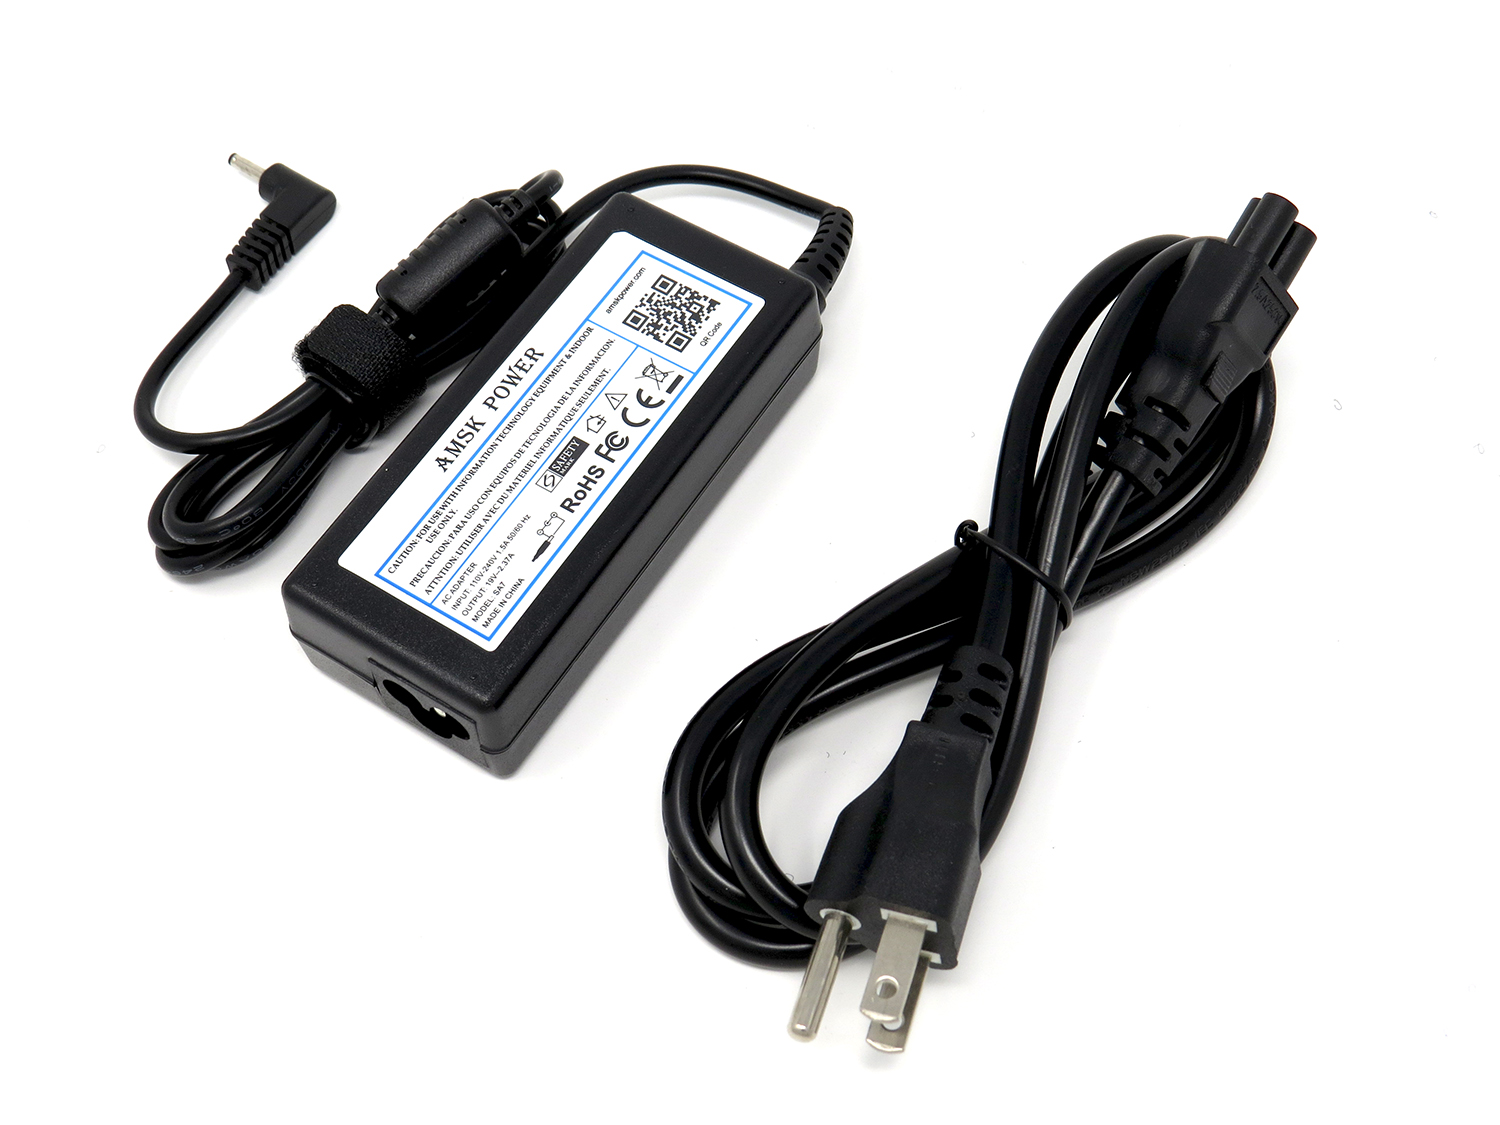 AMSK POWER AC Adapter for Samsung AD-4019, AD-4019P, CPA09-002, PA-1400-14, AA-PA2N40S, AD-4019W, AA-PA2N40L, BA44-00278A, AA-PA3NS40/US BA44-00279A - image 1 of 3